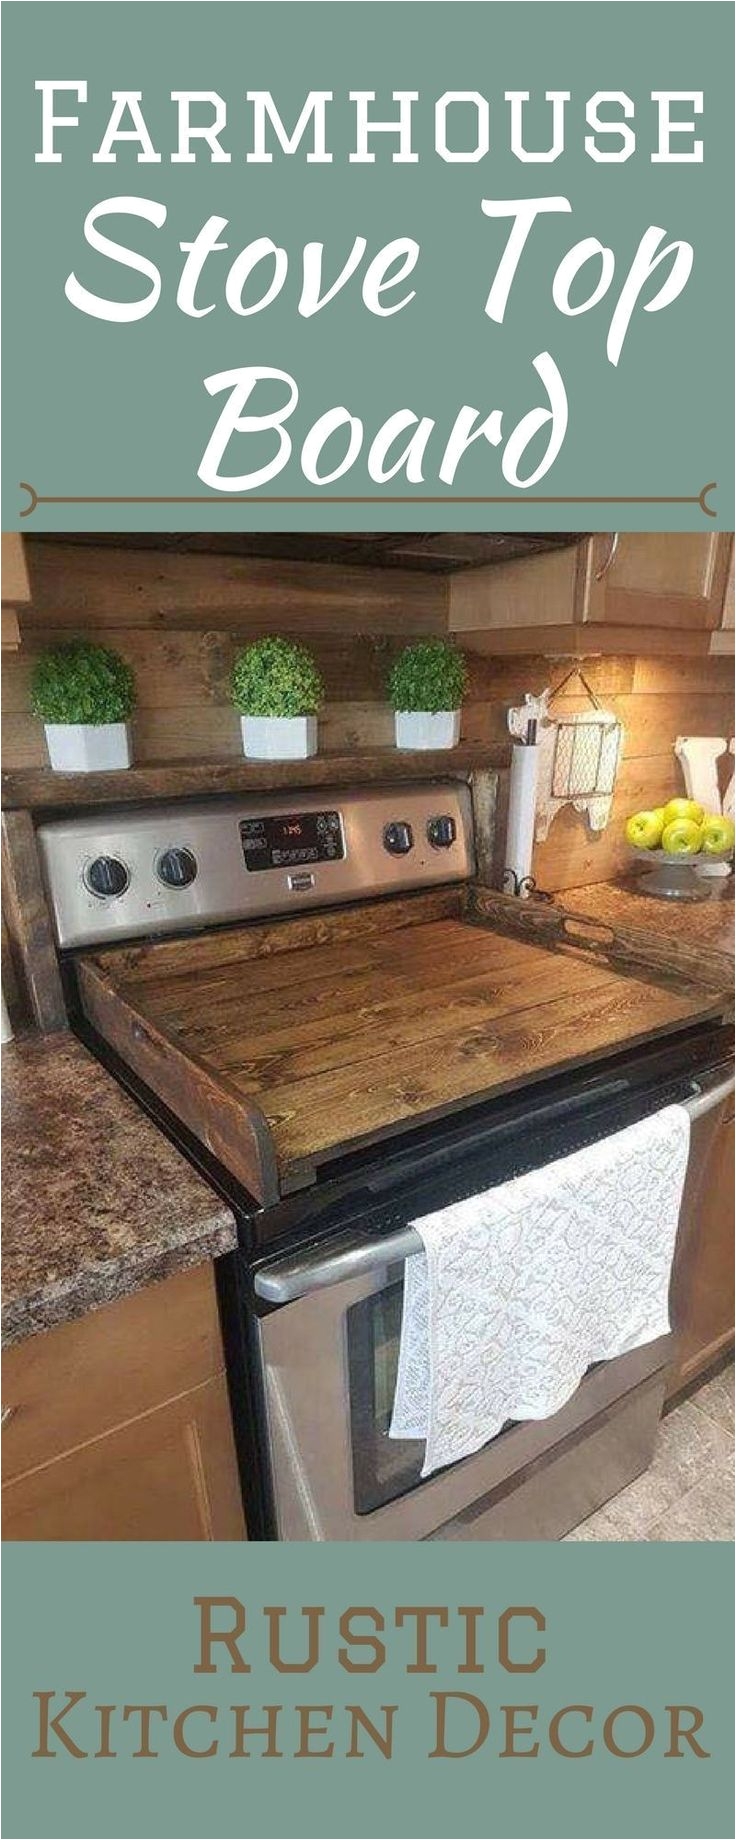 beautiful wood stove top board create a clean look in your kitchen farmhouse decor